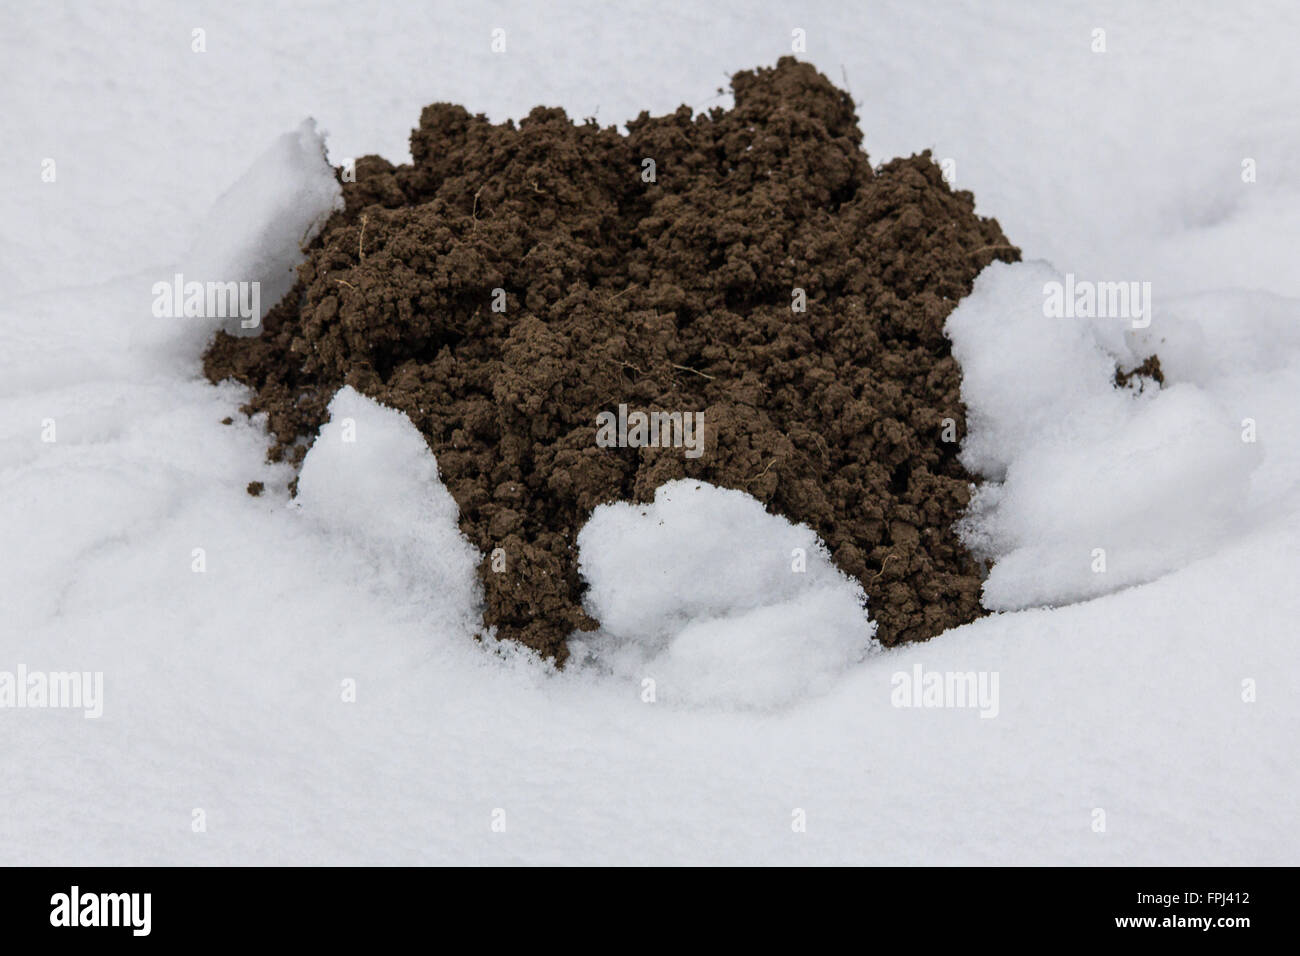 Mole (Talpa europaea) hill fresh spoil heap still moving pushing through winter snow covered ground soft soil growing mound but no sign of busy mole Stock Photo